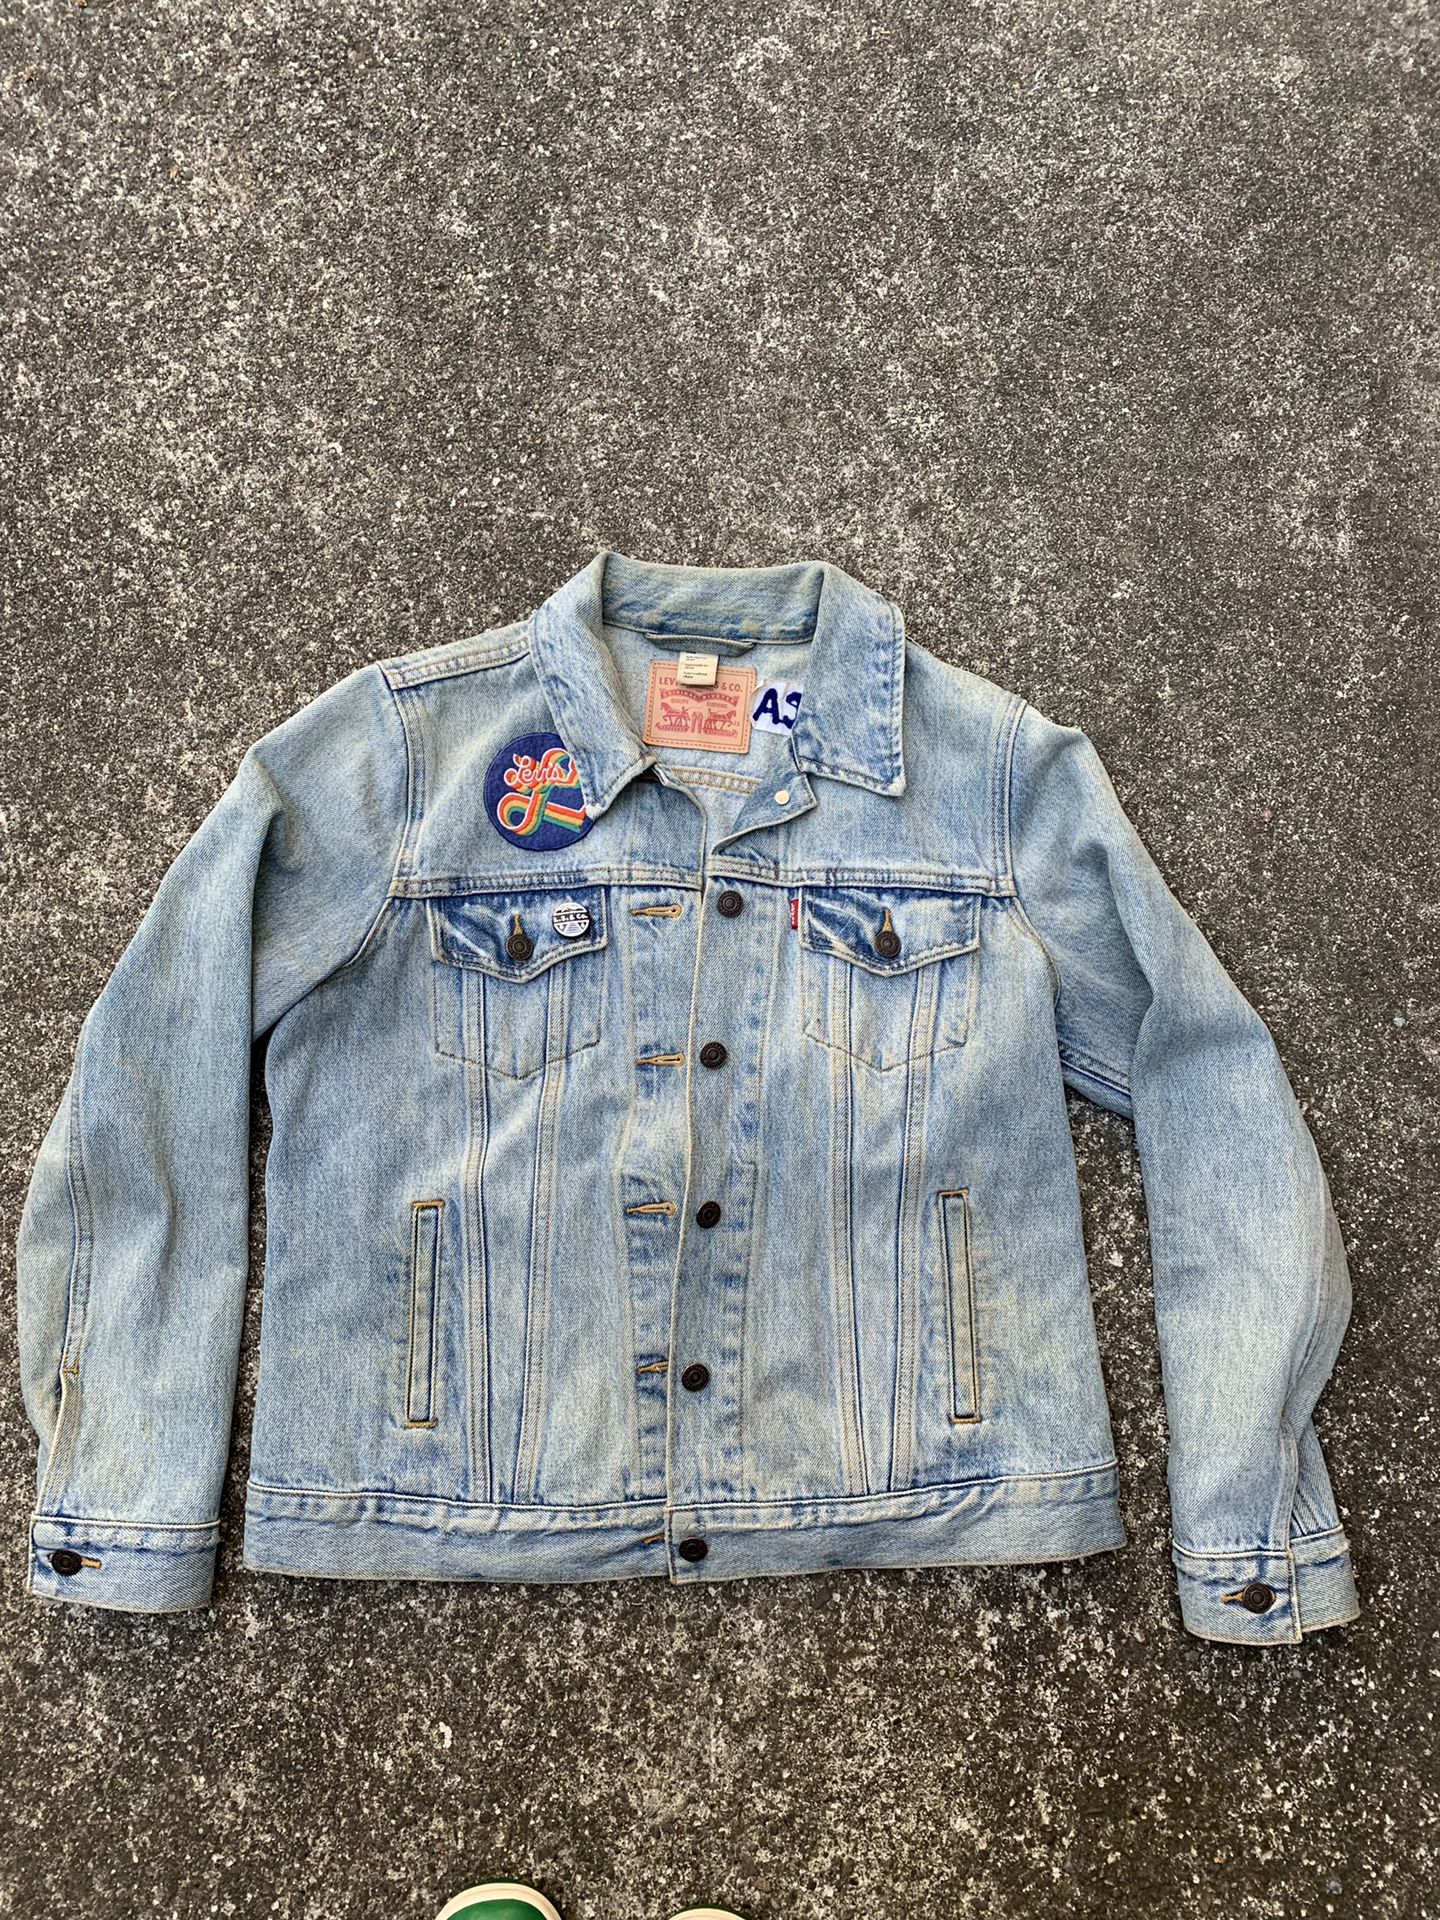 Levi’s denim jacket with patches and embroidery size small